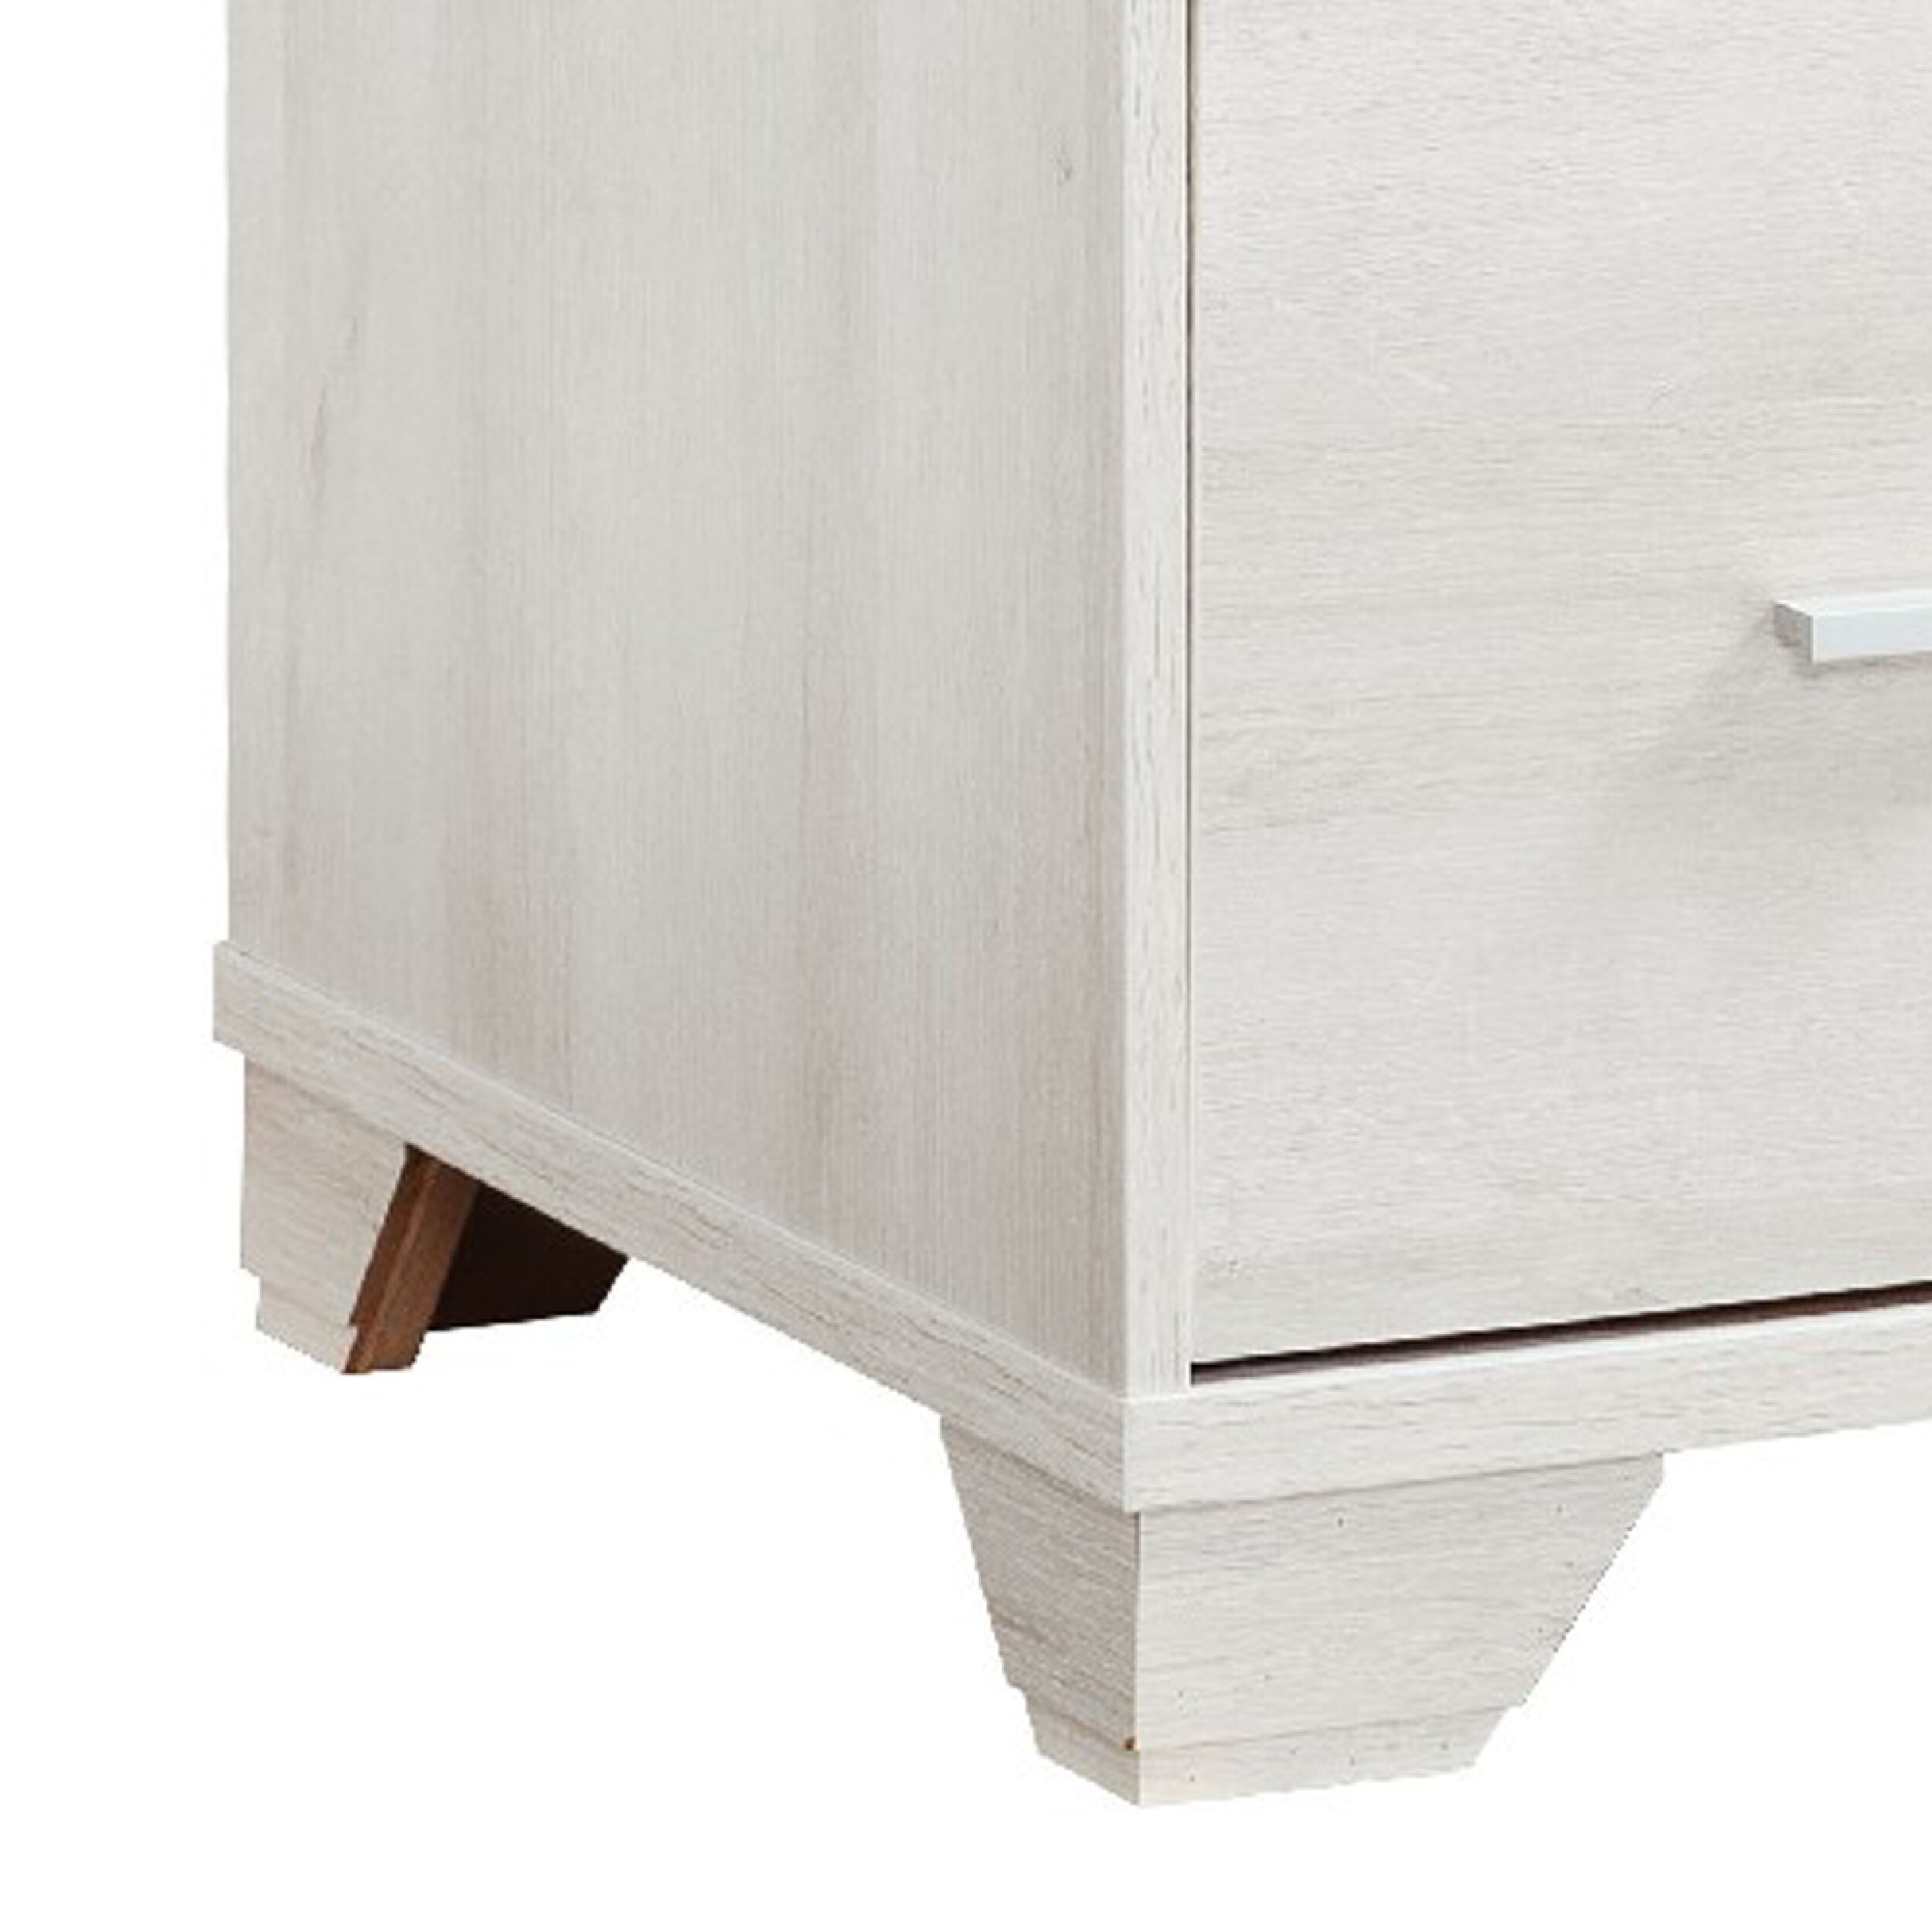 31 Inch File Cabinet Printer Stand Table with 2 Drawers, Oak White - image 4 of 5